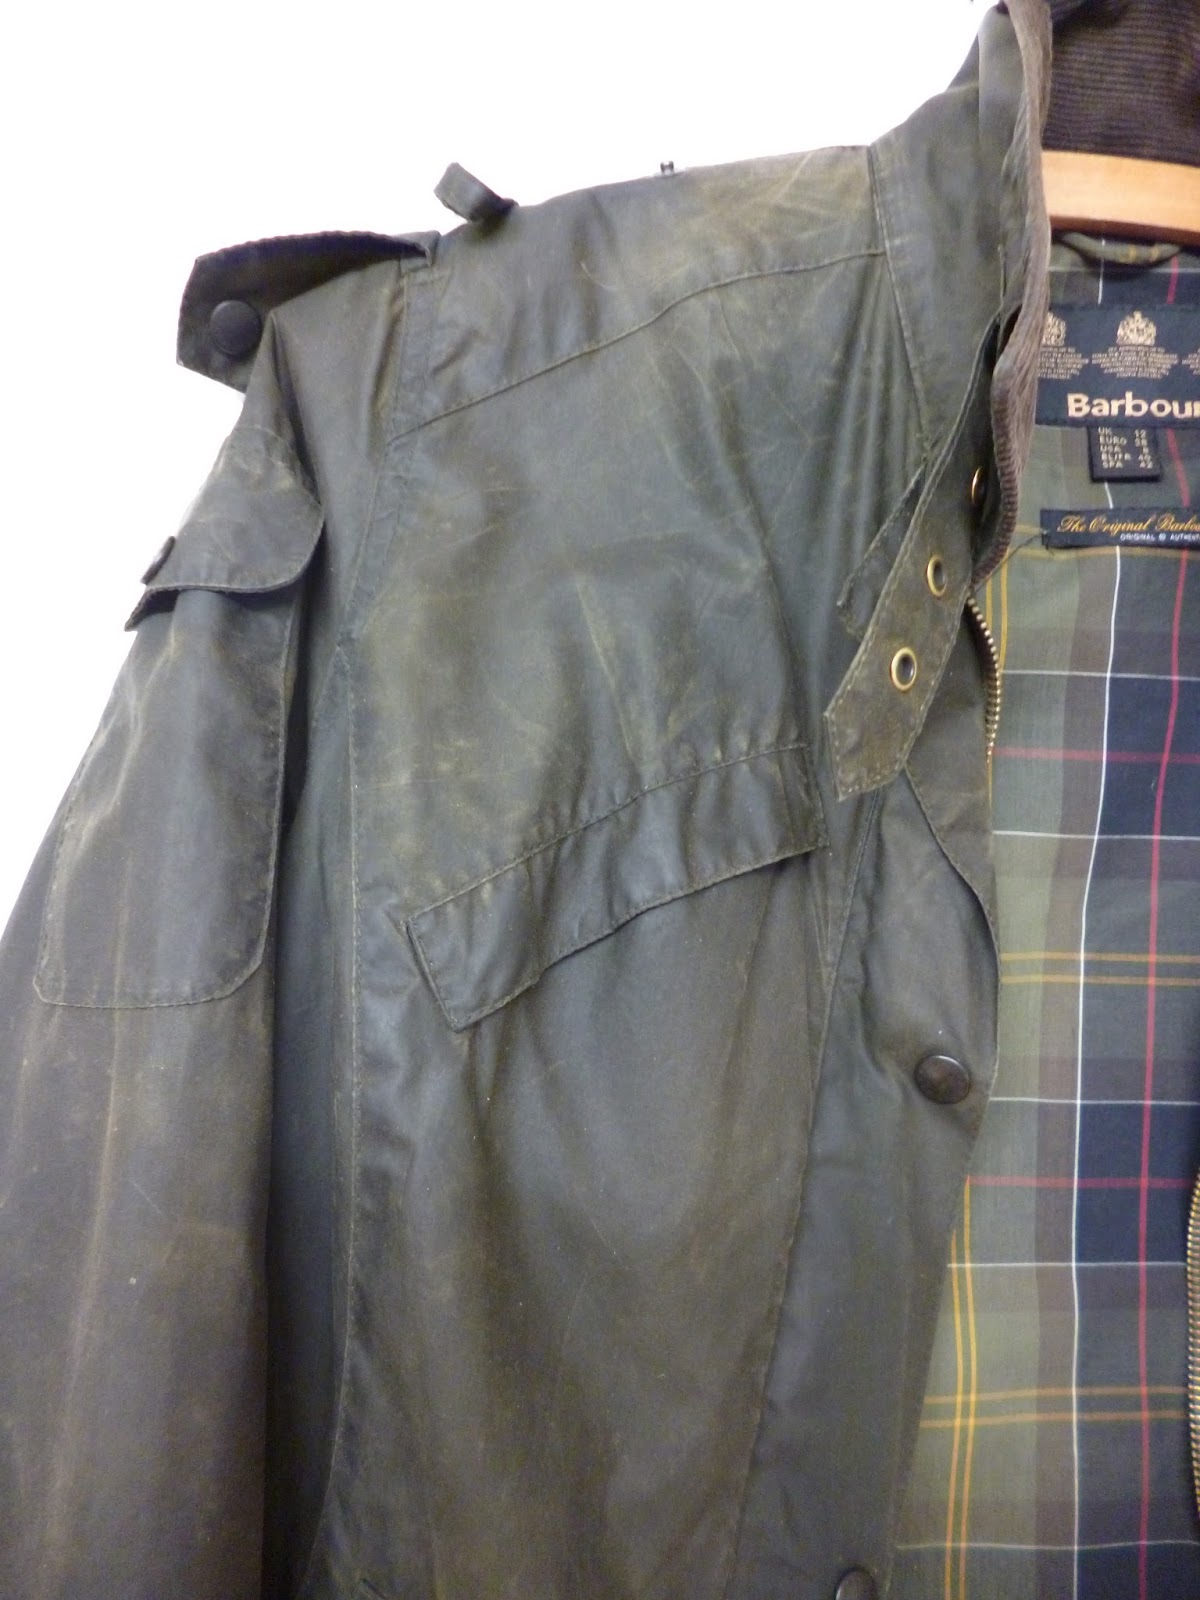 barbour wax before and after